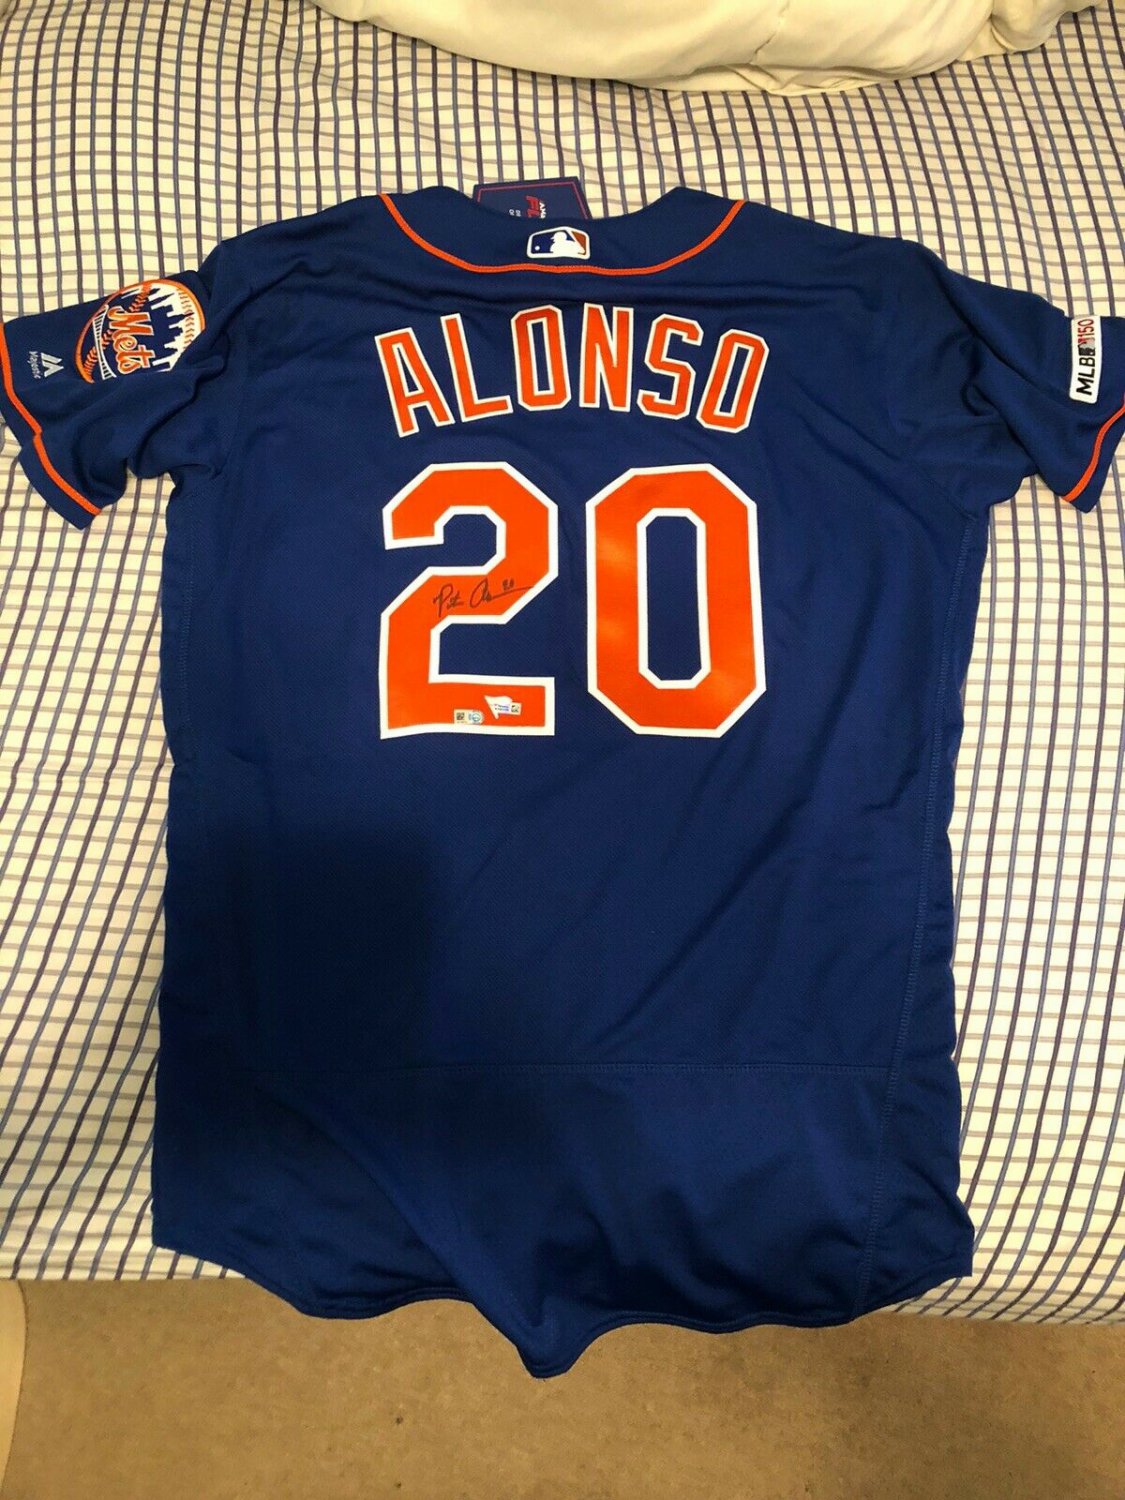 pete alonso authentic jersey